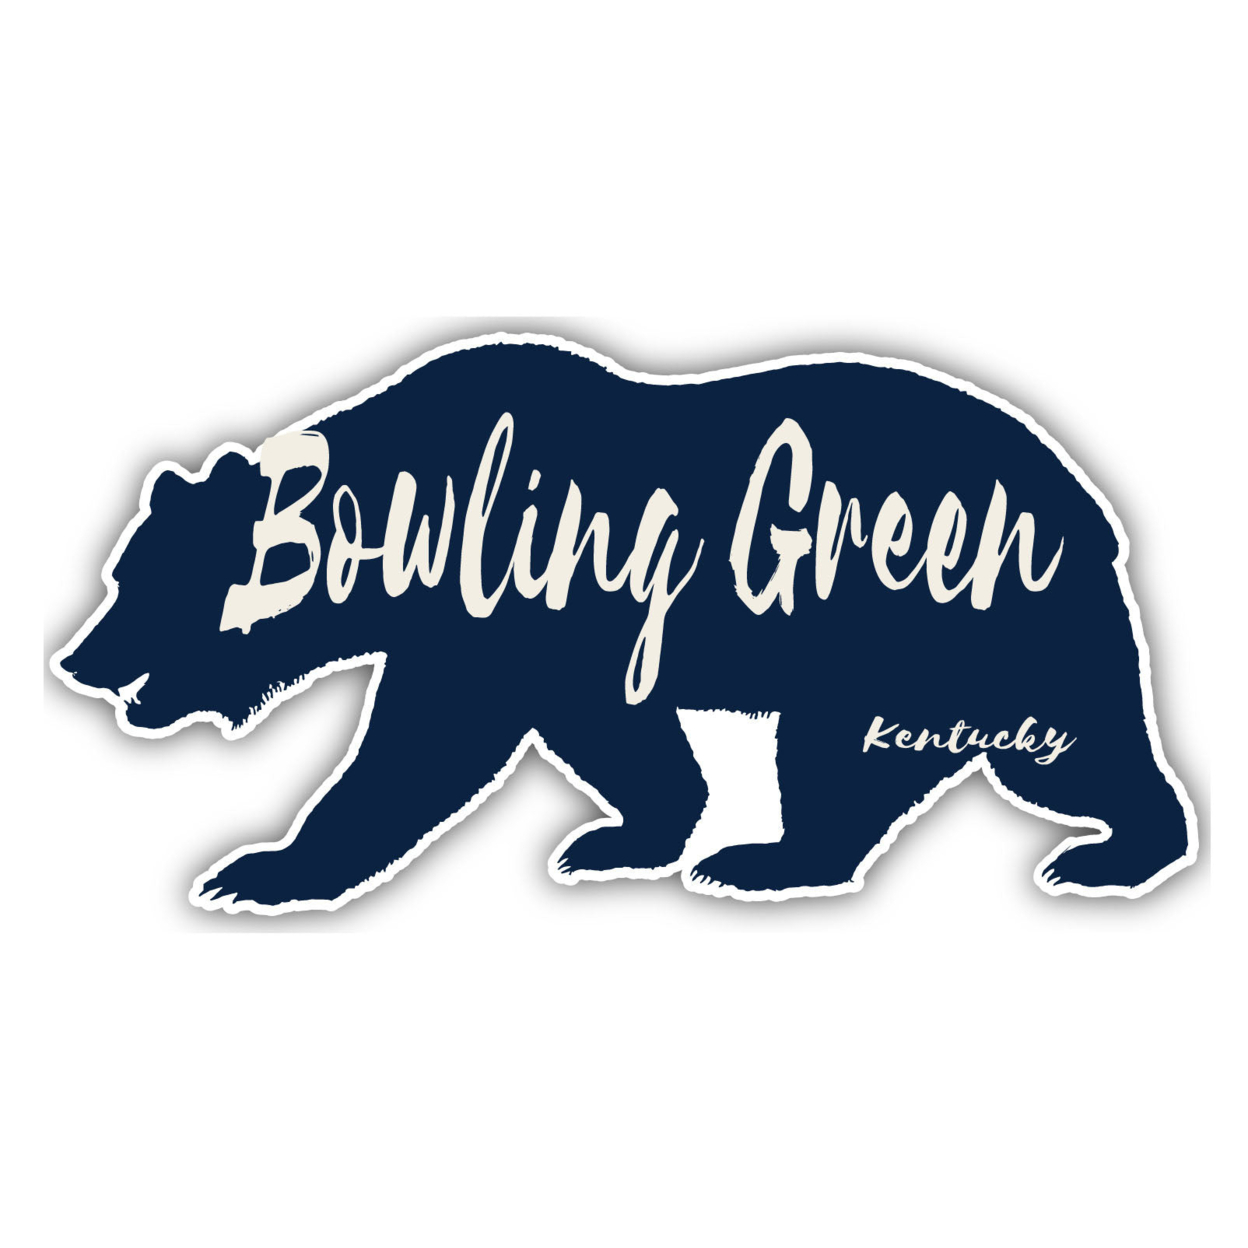 Bowling Green Kentucky Souvenir Decorative Stickers (Choose Theme And Size) - 4-Pack, 2-Inch, Bear